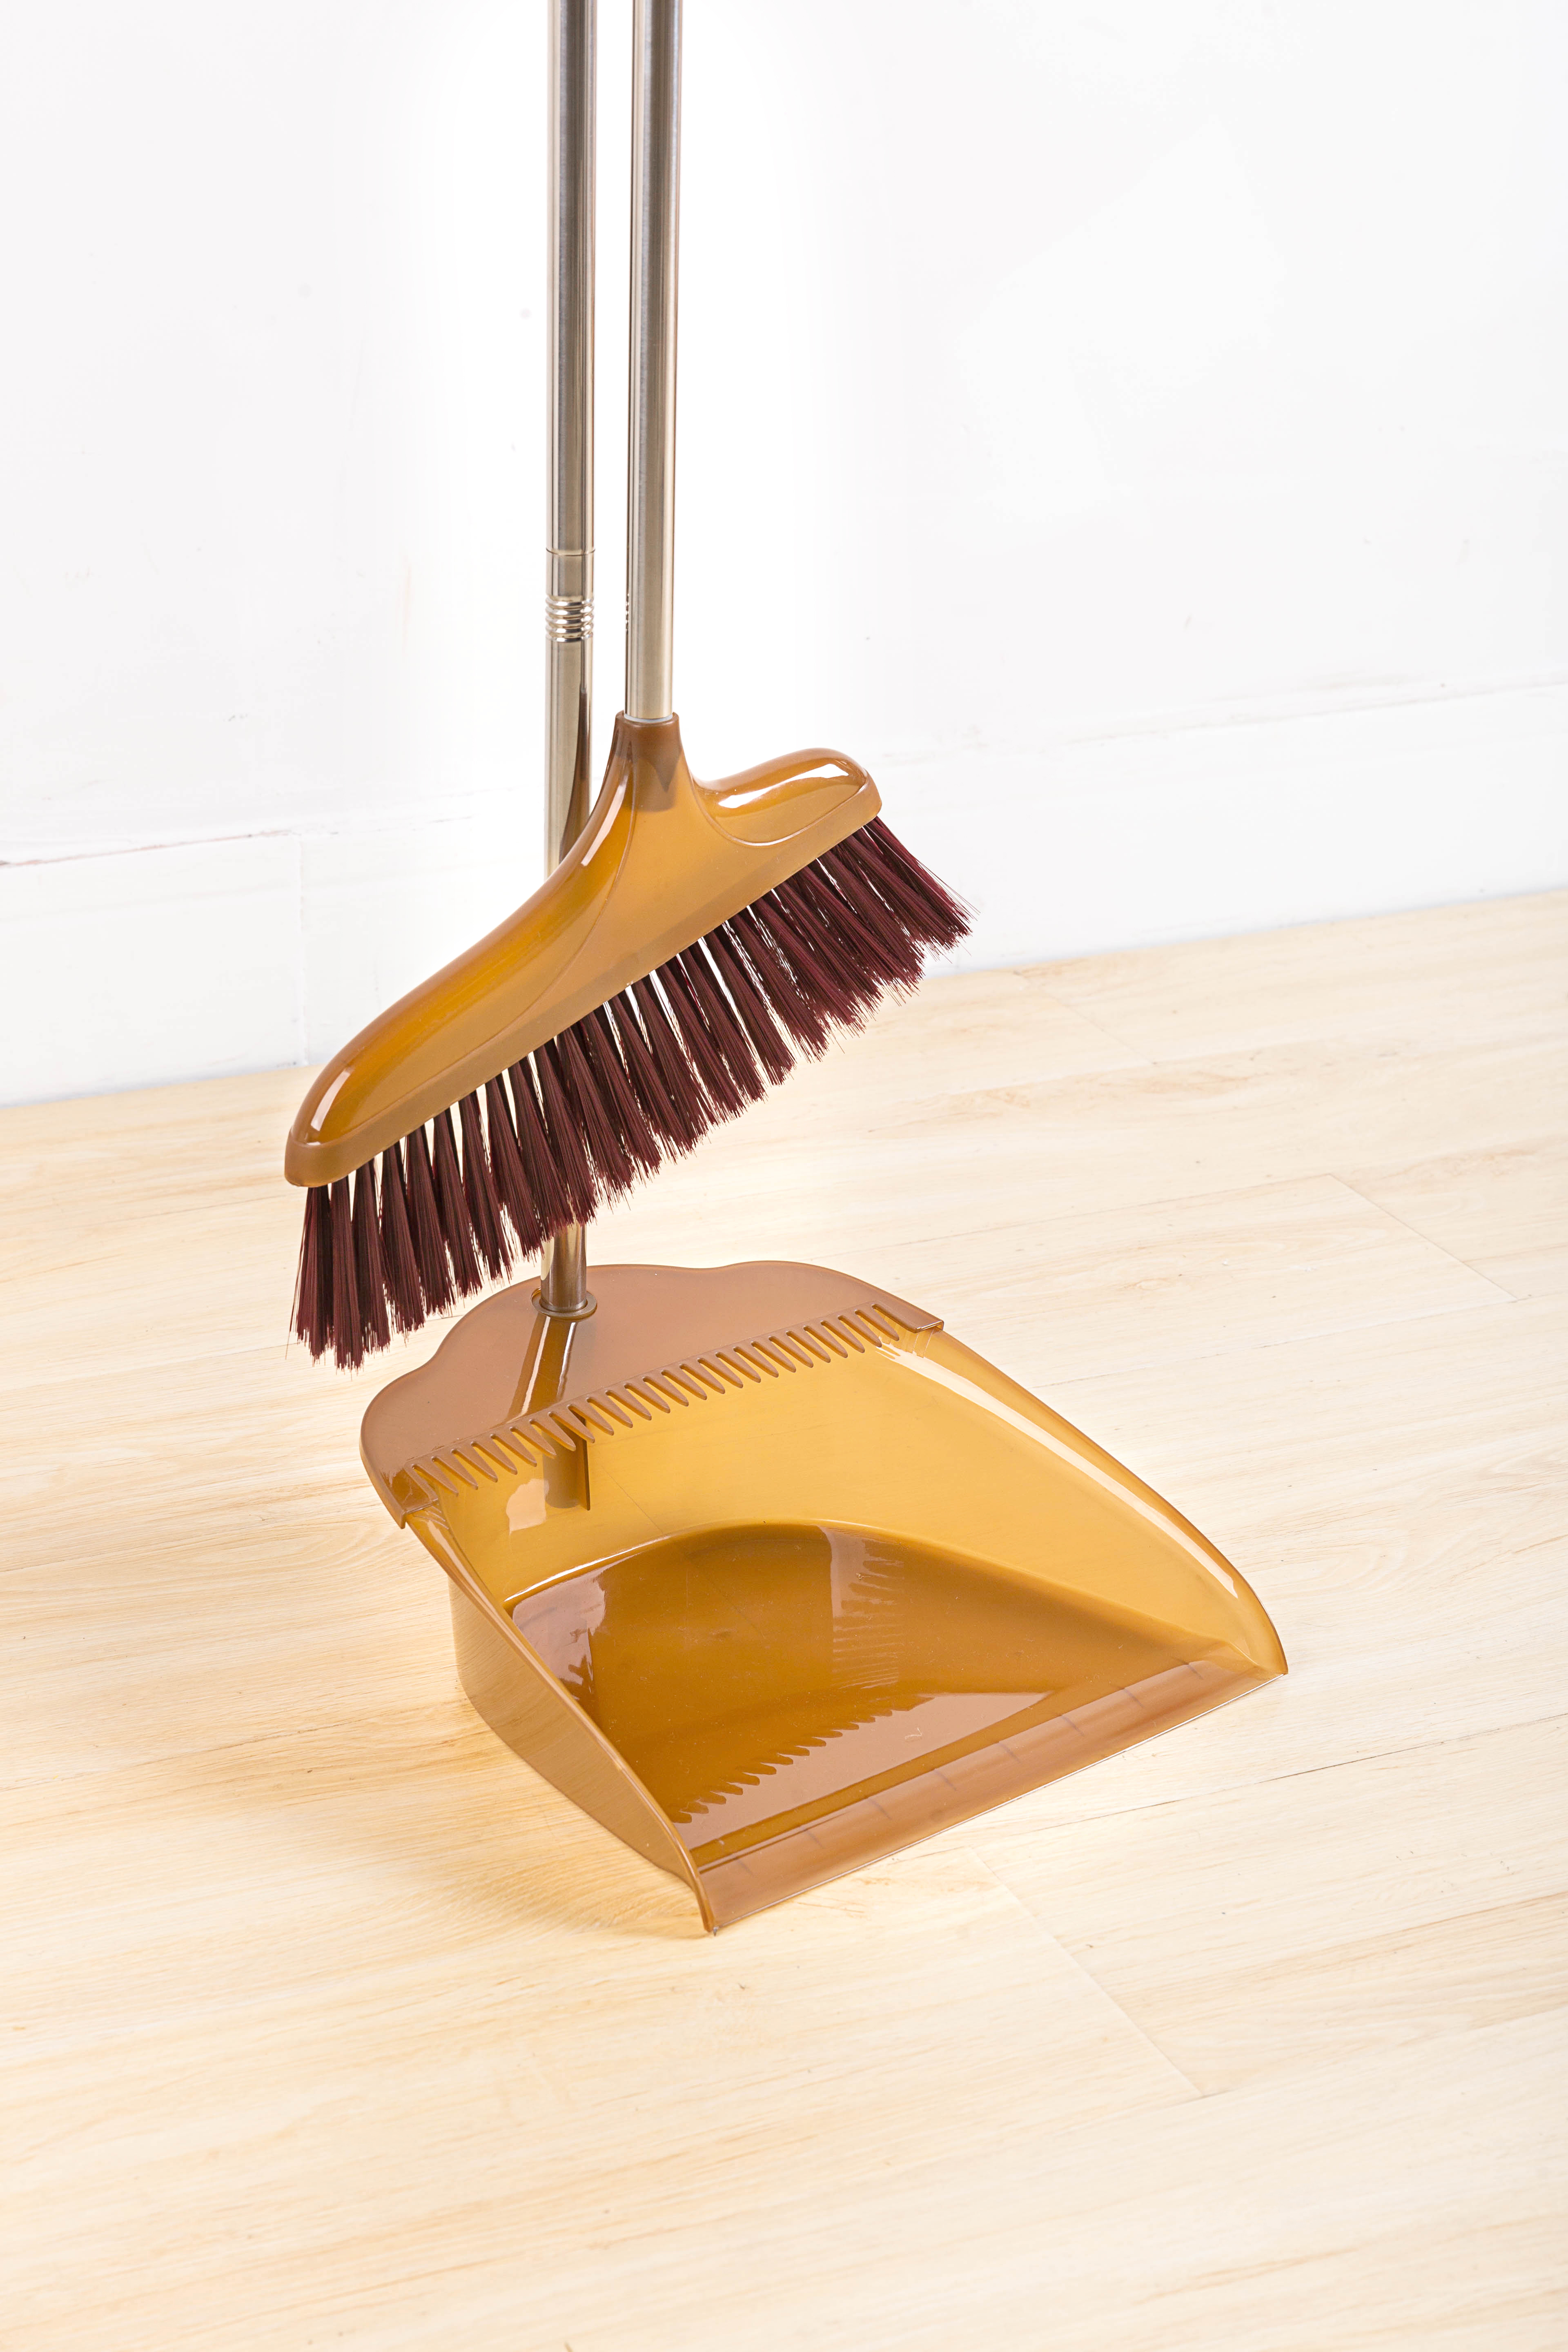 Long Handled stainless steel Broom And Dustpan Set M1007